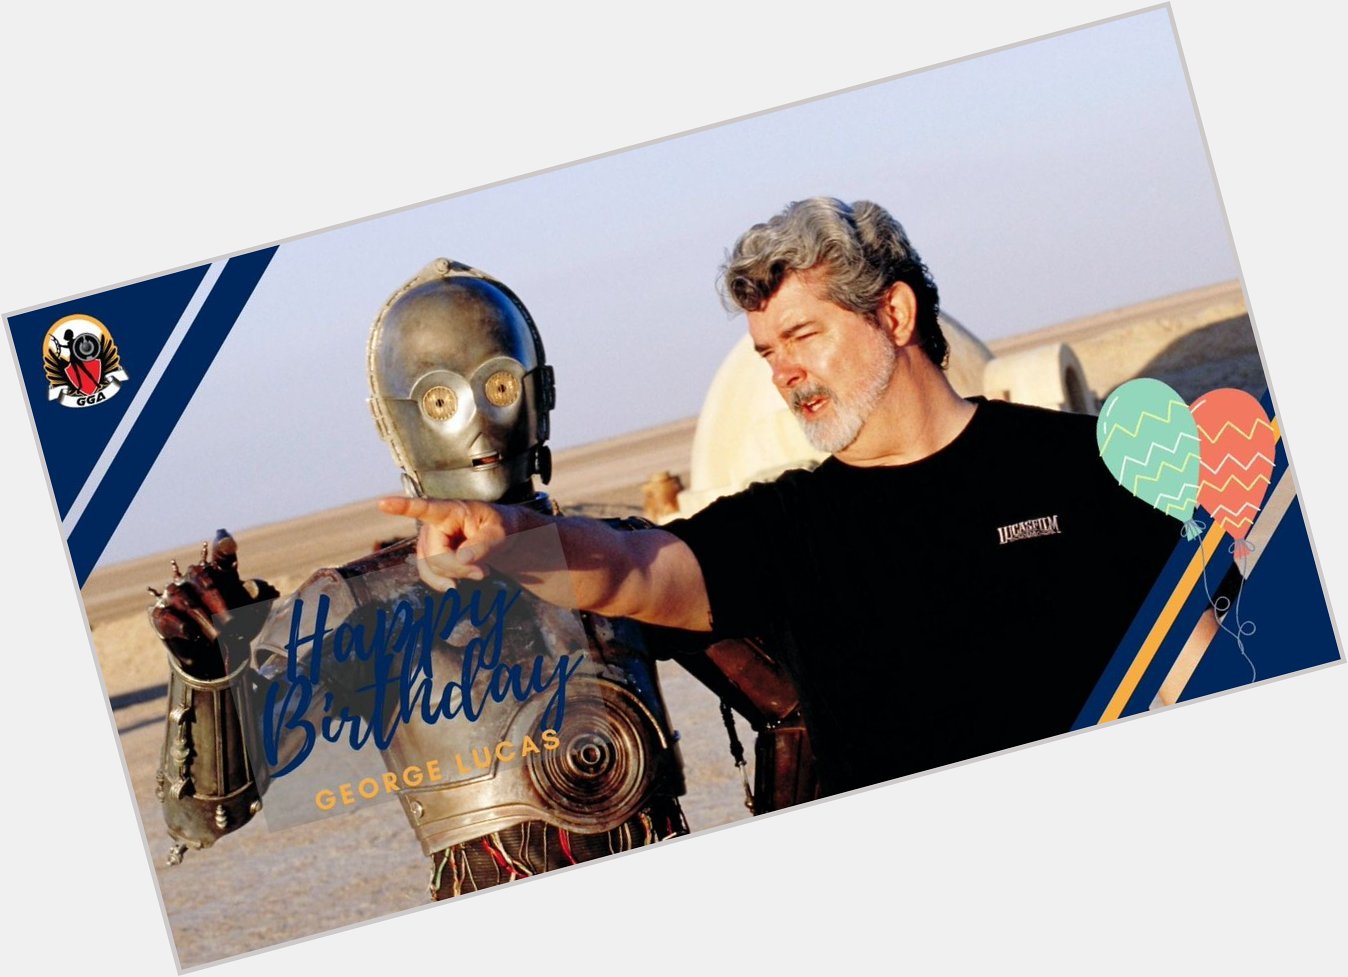 Happy Birthday to the father of Star Wars - George Lucas!  